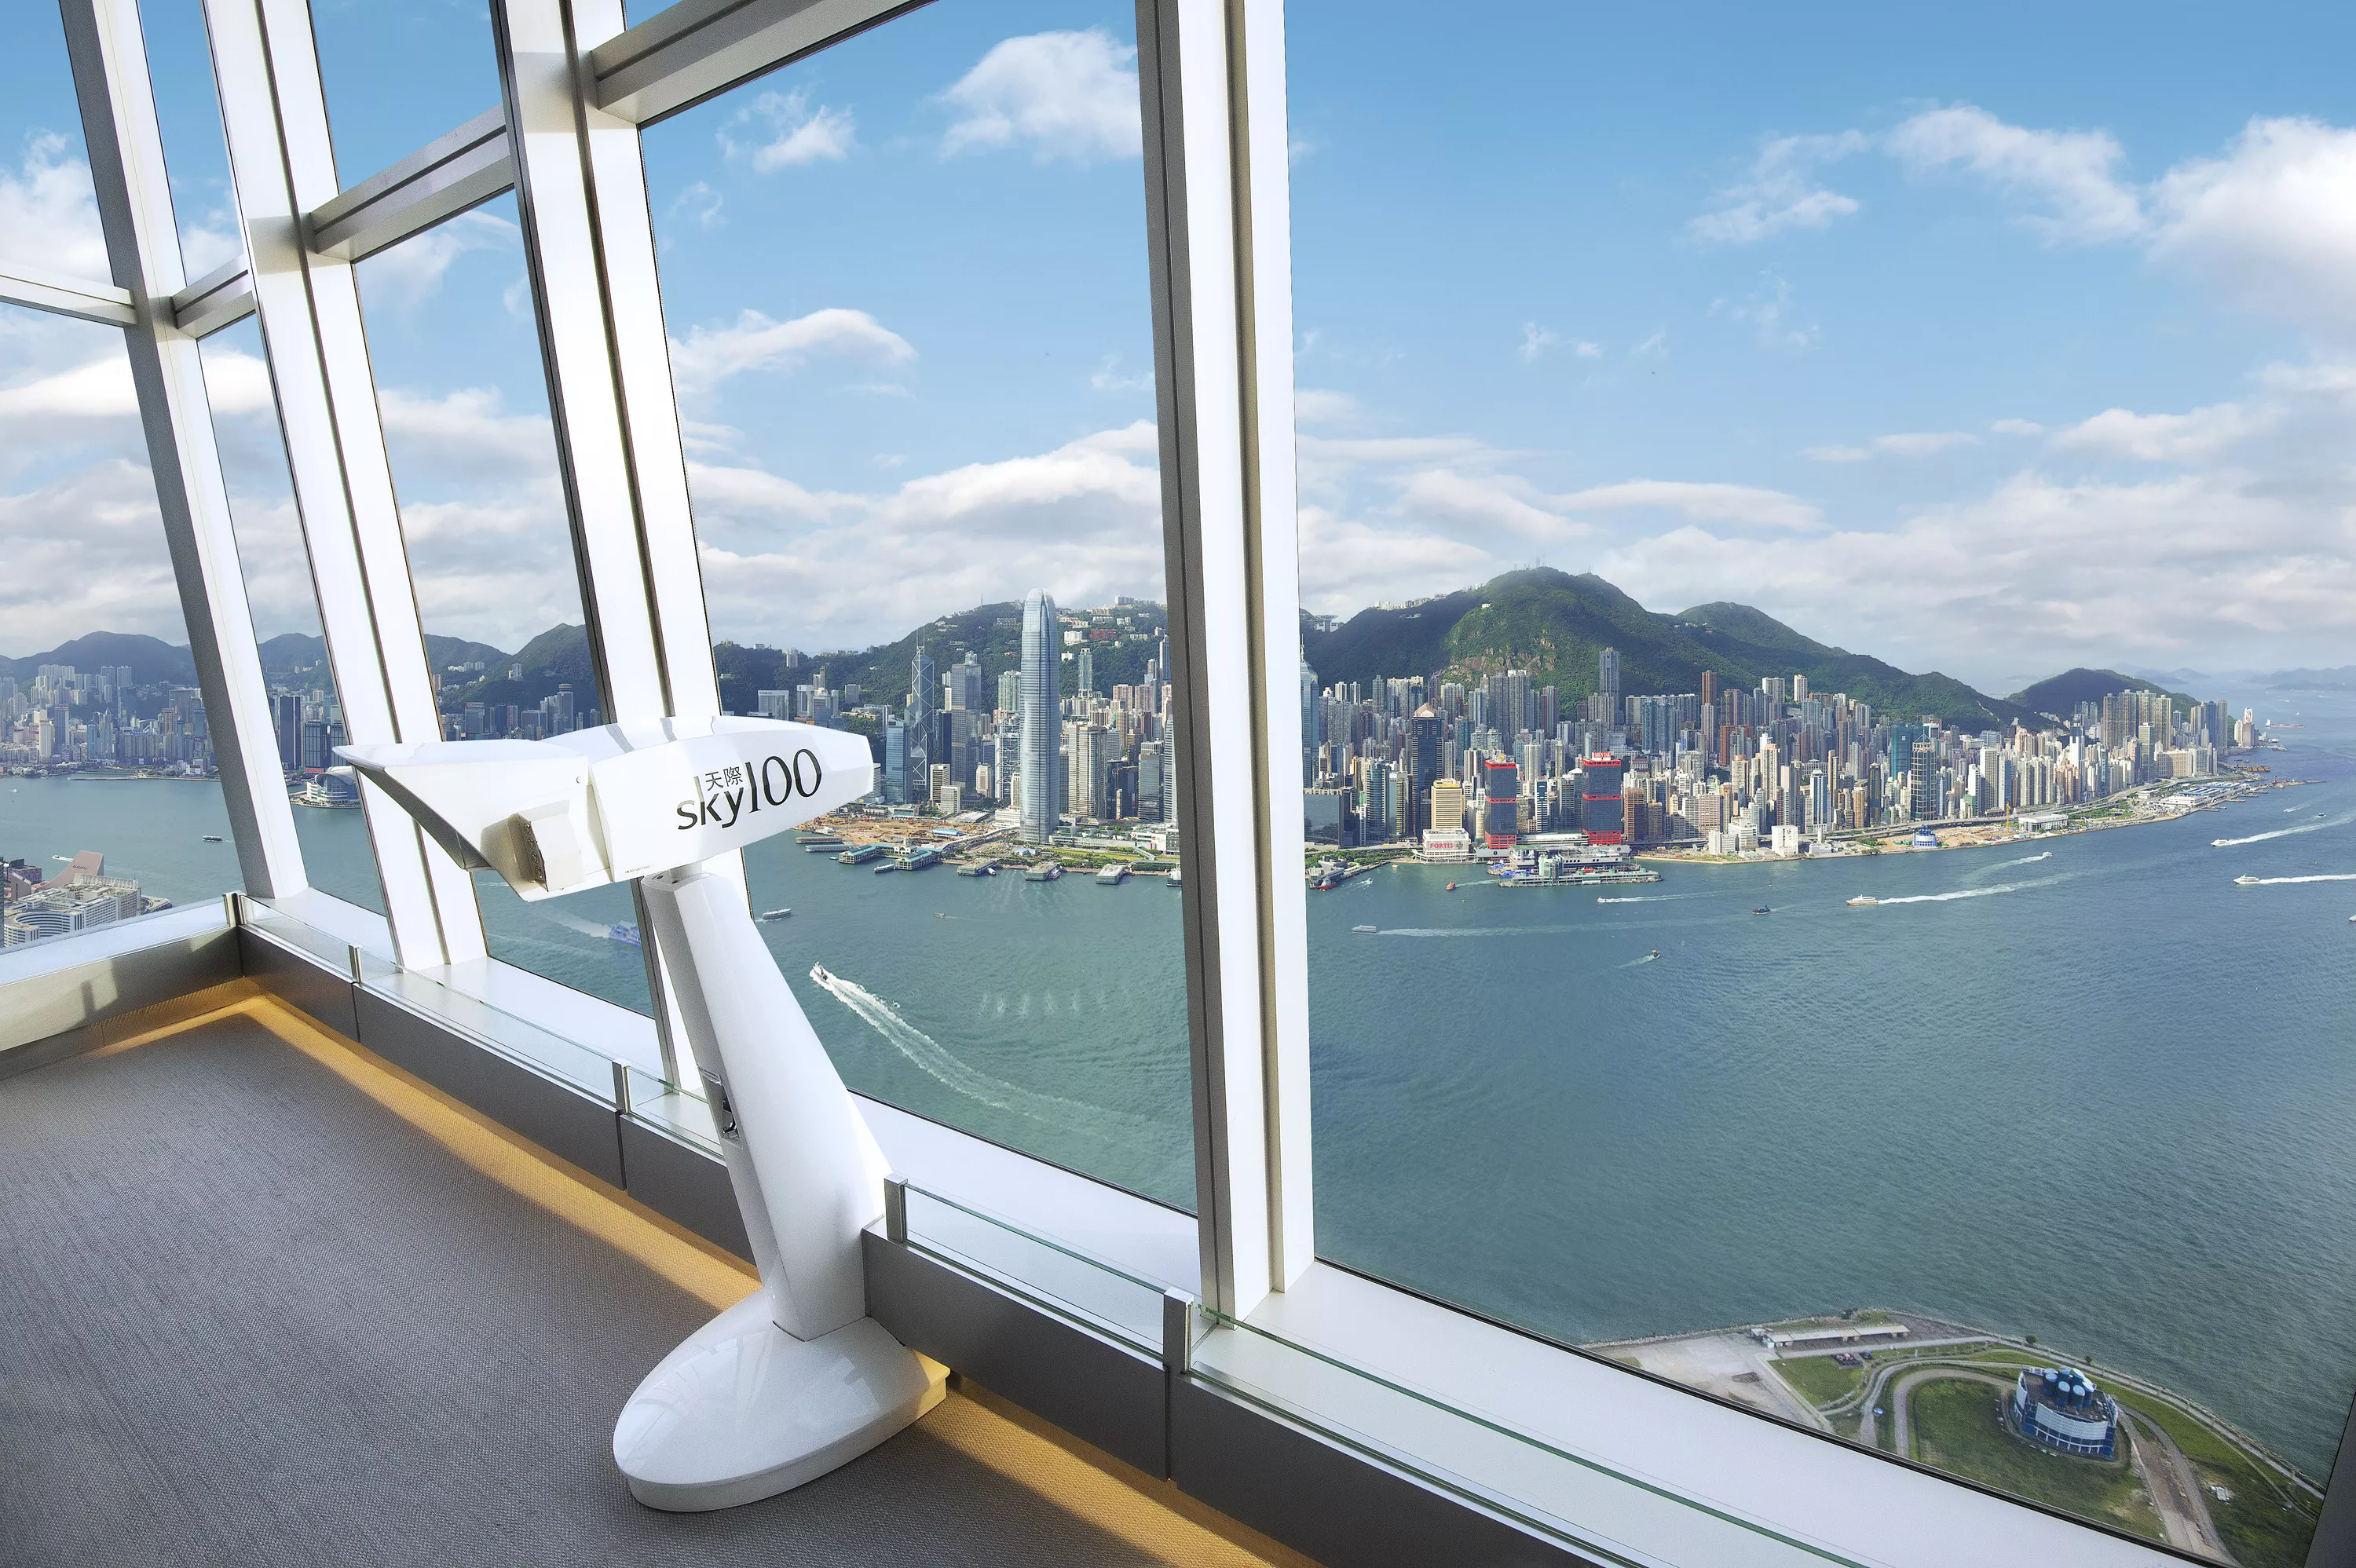 Sky100 Hong Kong Observation Deck Deals & Discounts in China, East Asia | Observation Decks - Rated 3.6